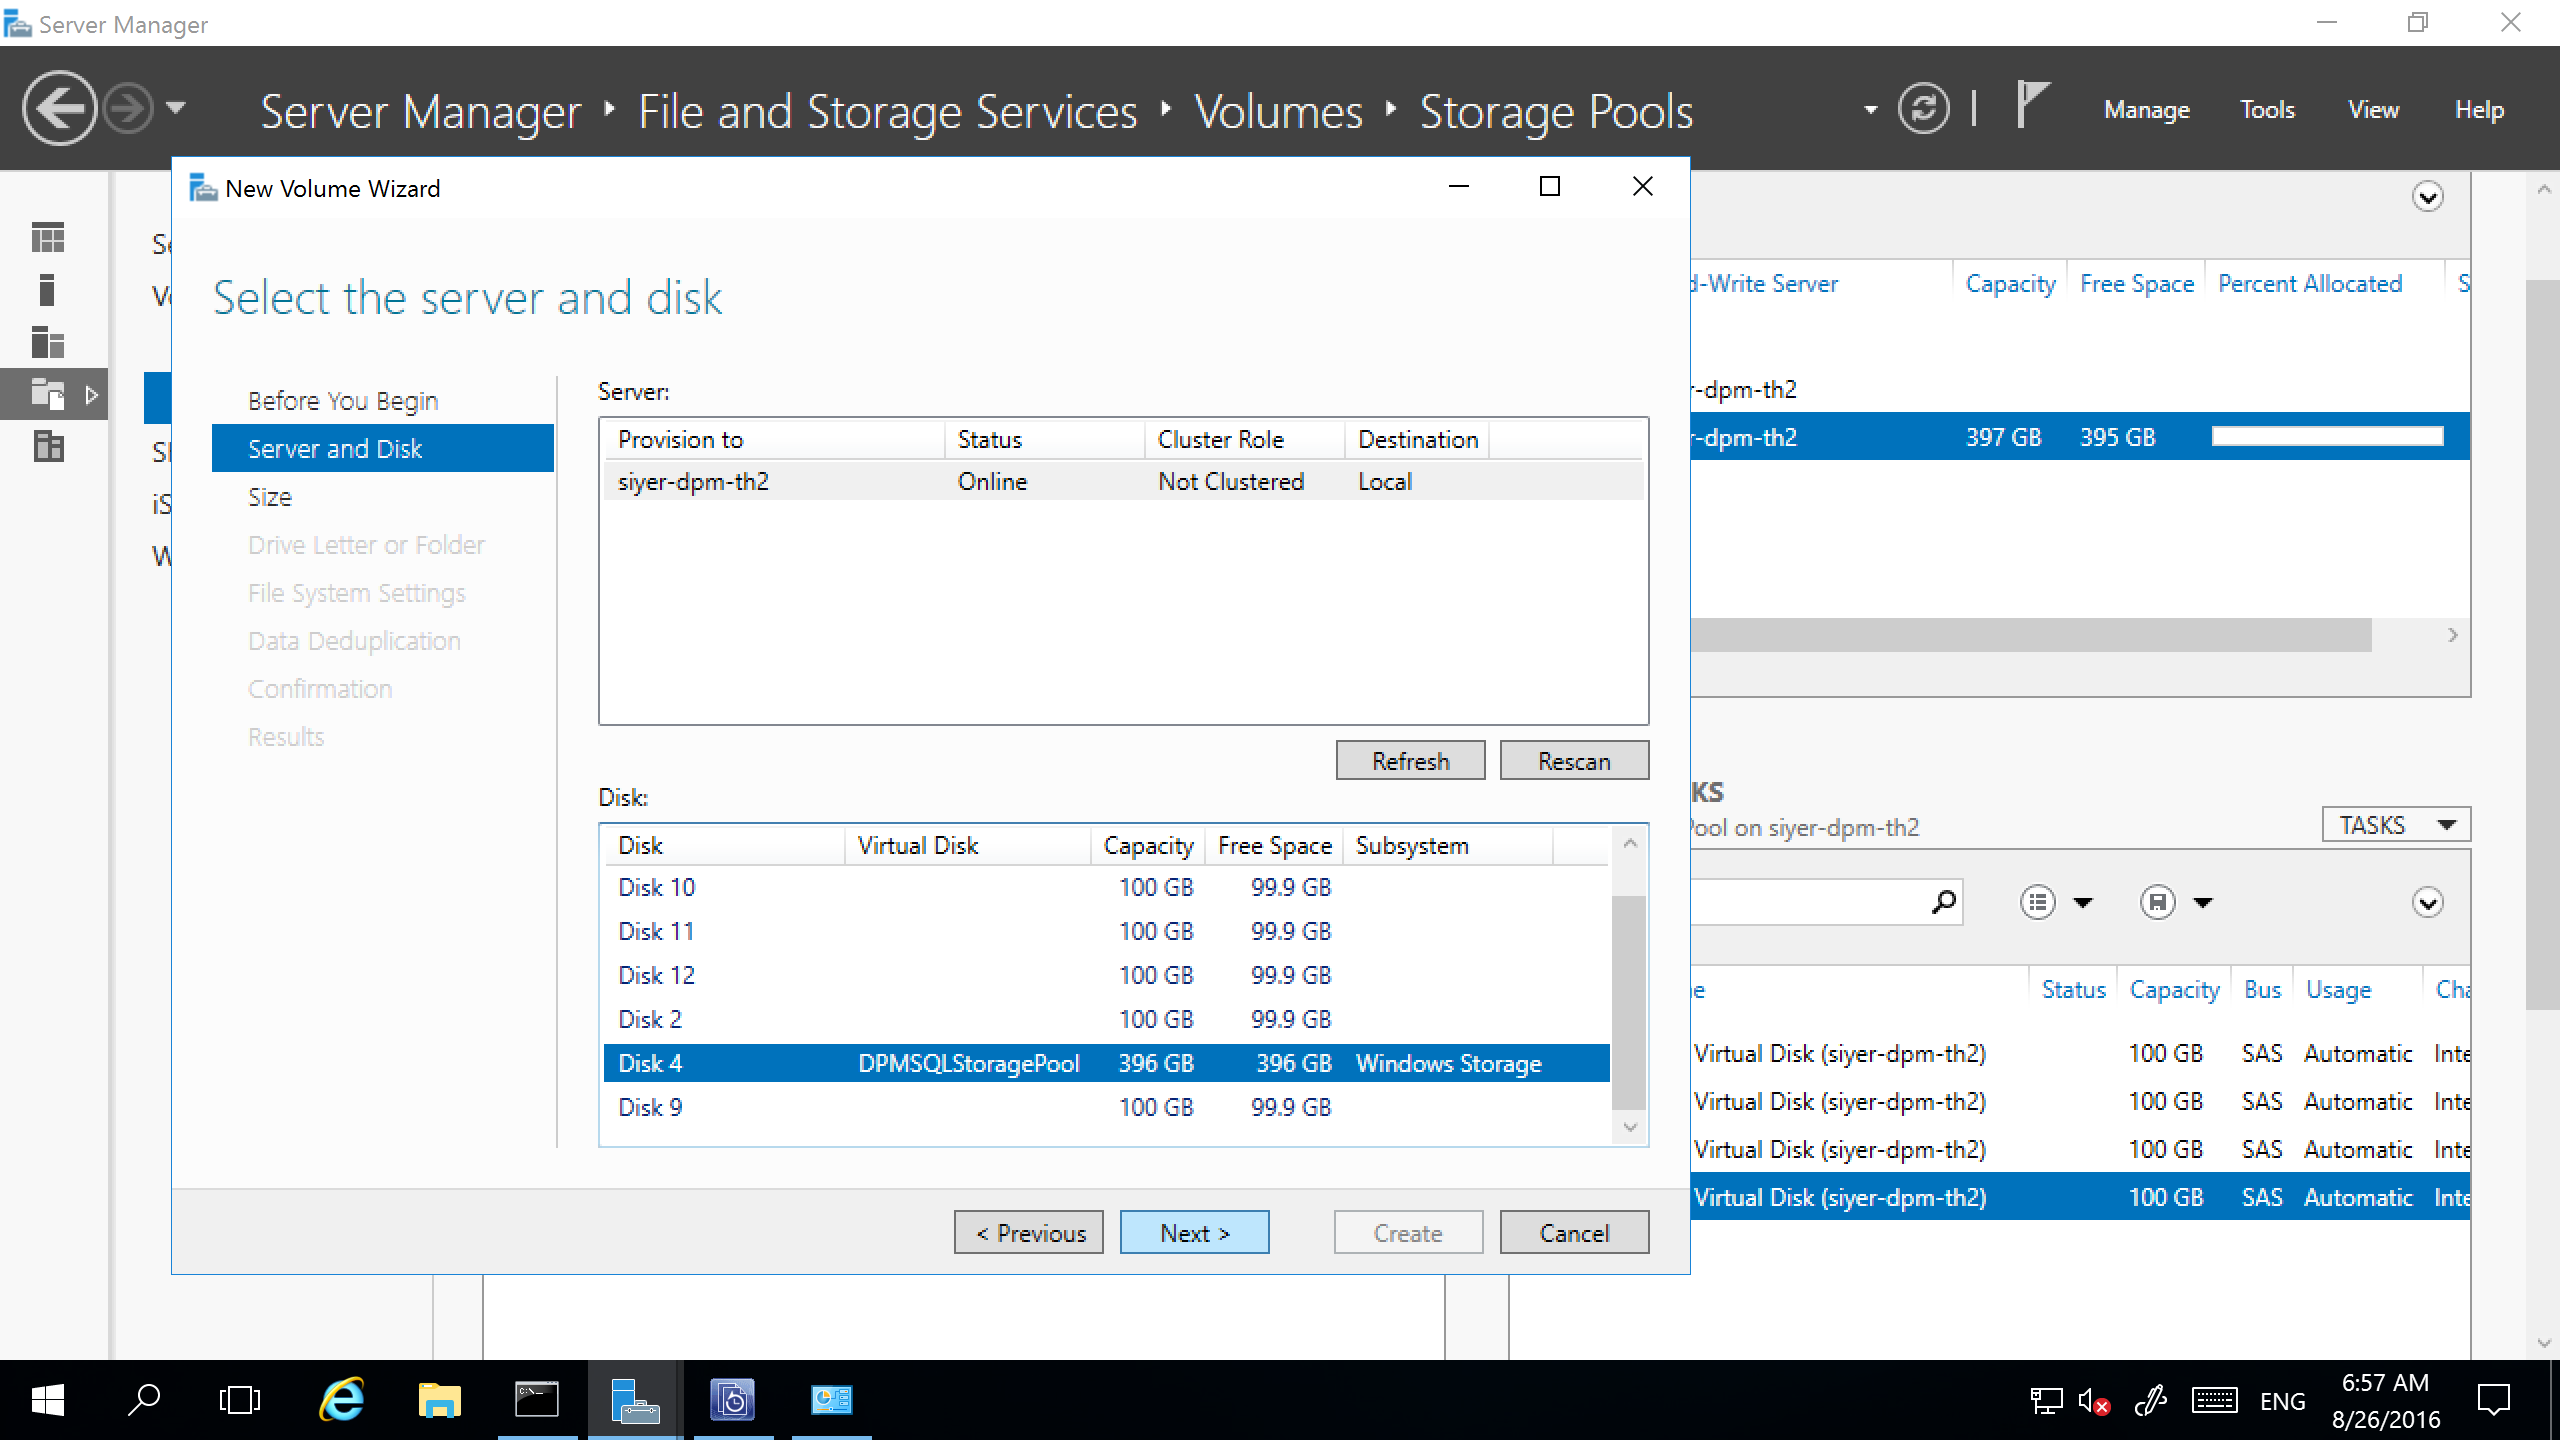 Screenshot shows how to select the server and disk.